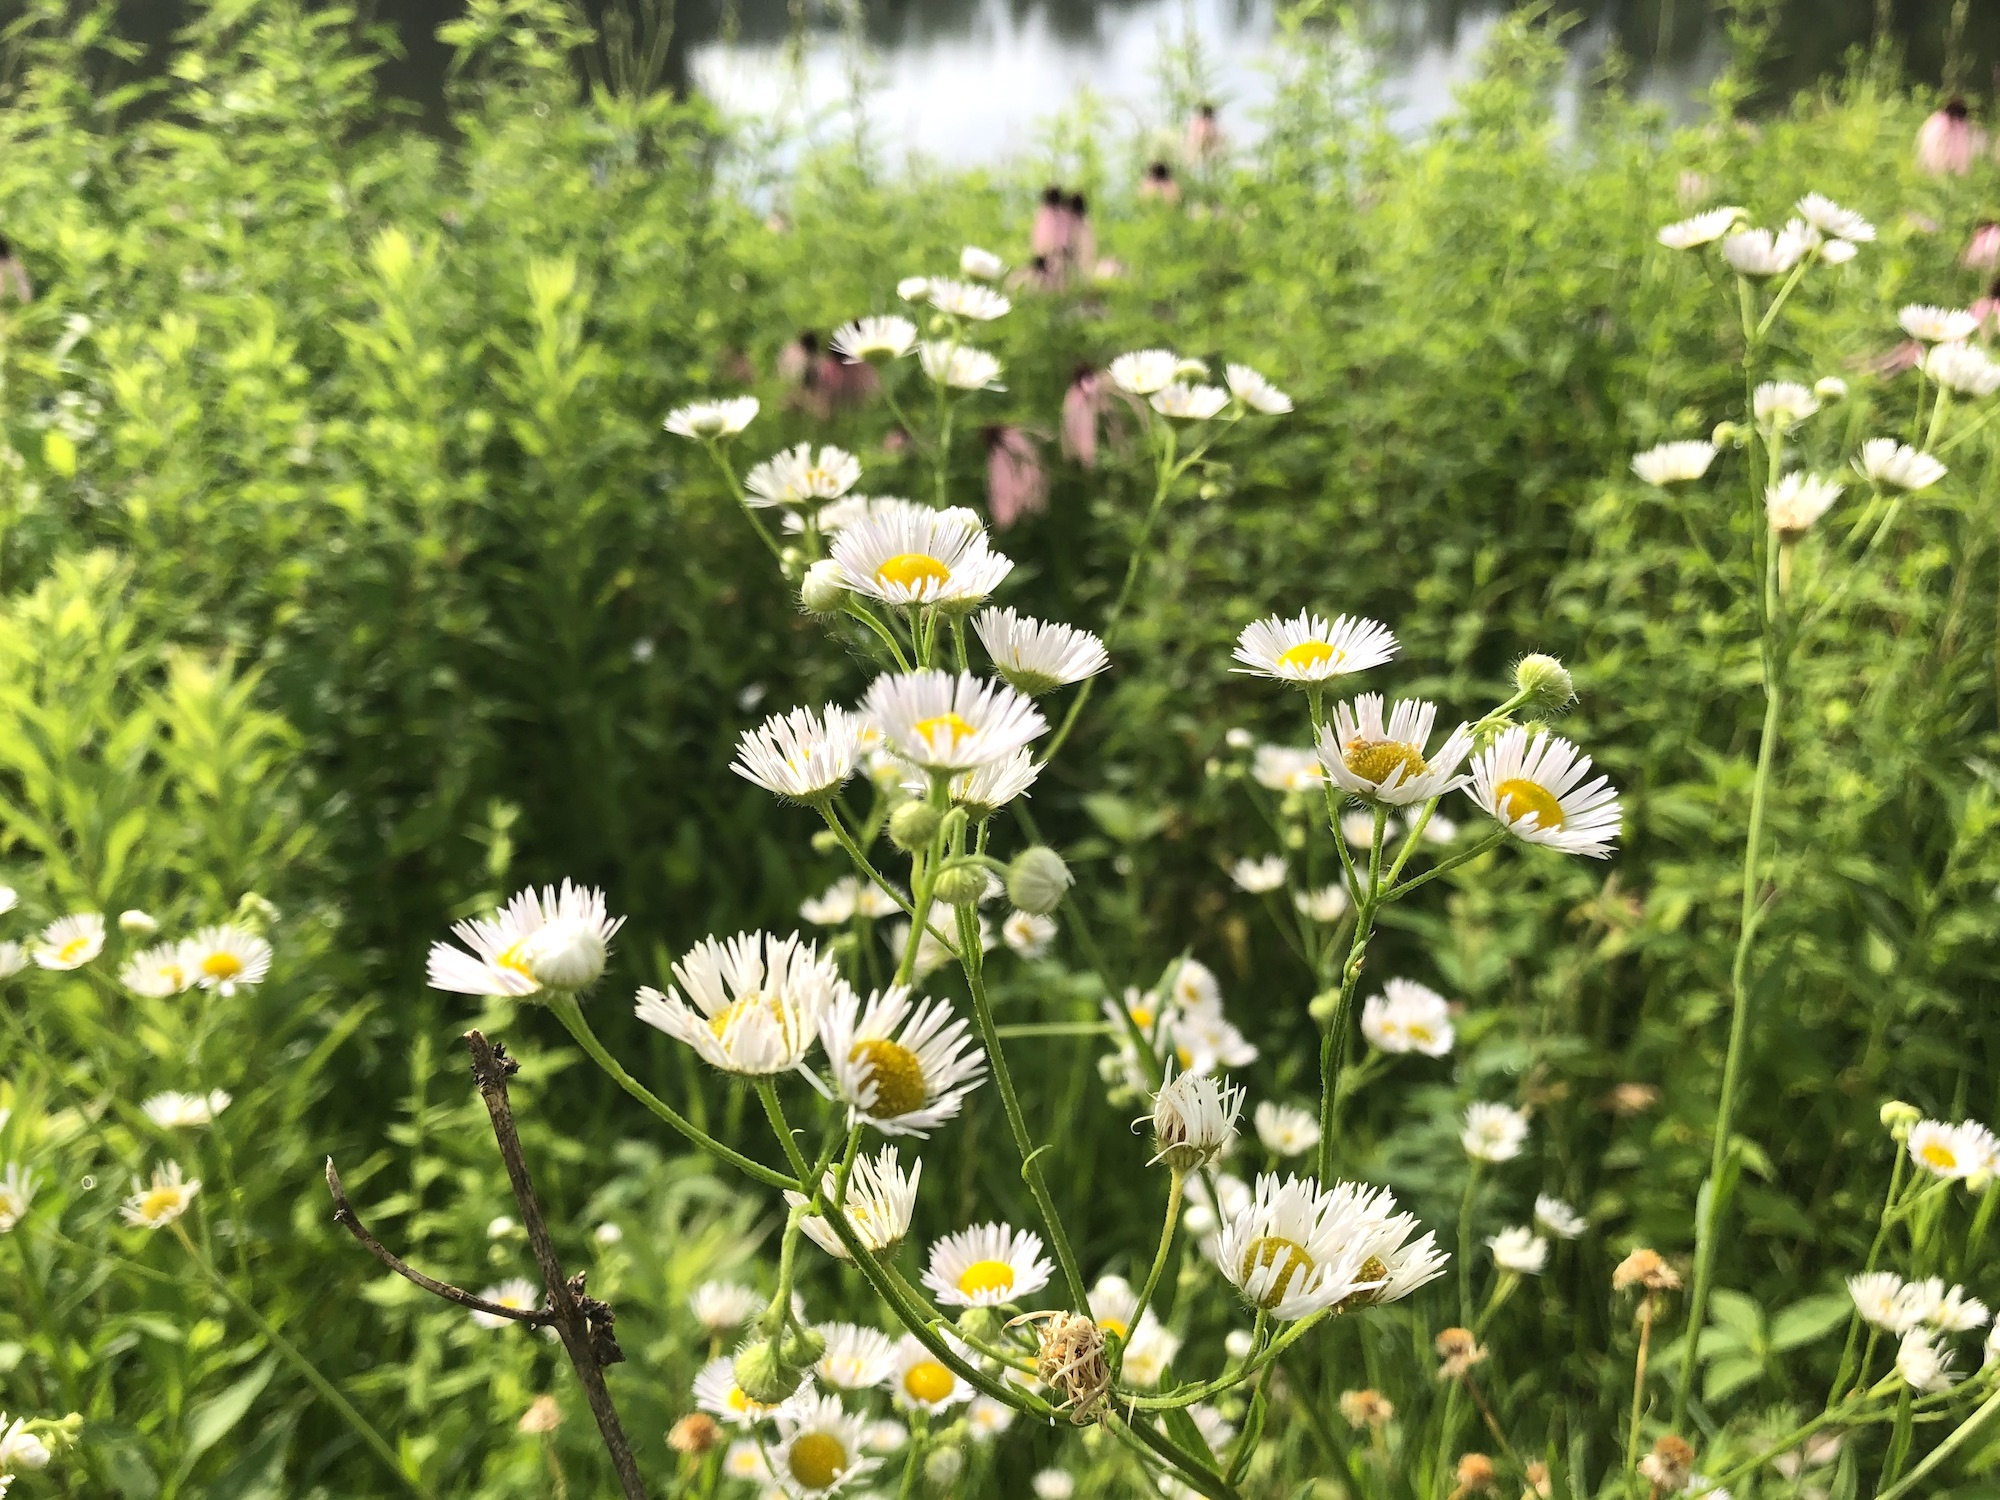 Fleabane on bank of retaining pond at the corner of Manitou Way and Nakoma Road in Madison, Wisconsin on July 6, 2019.